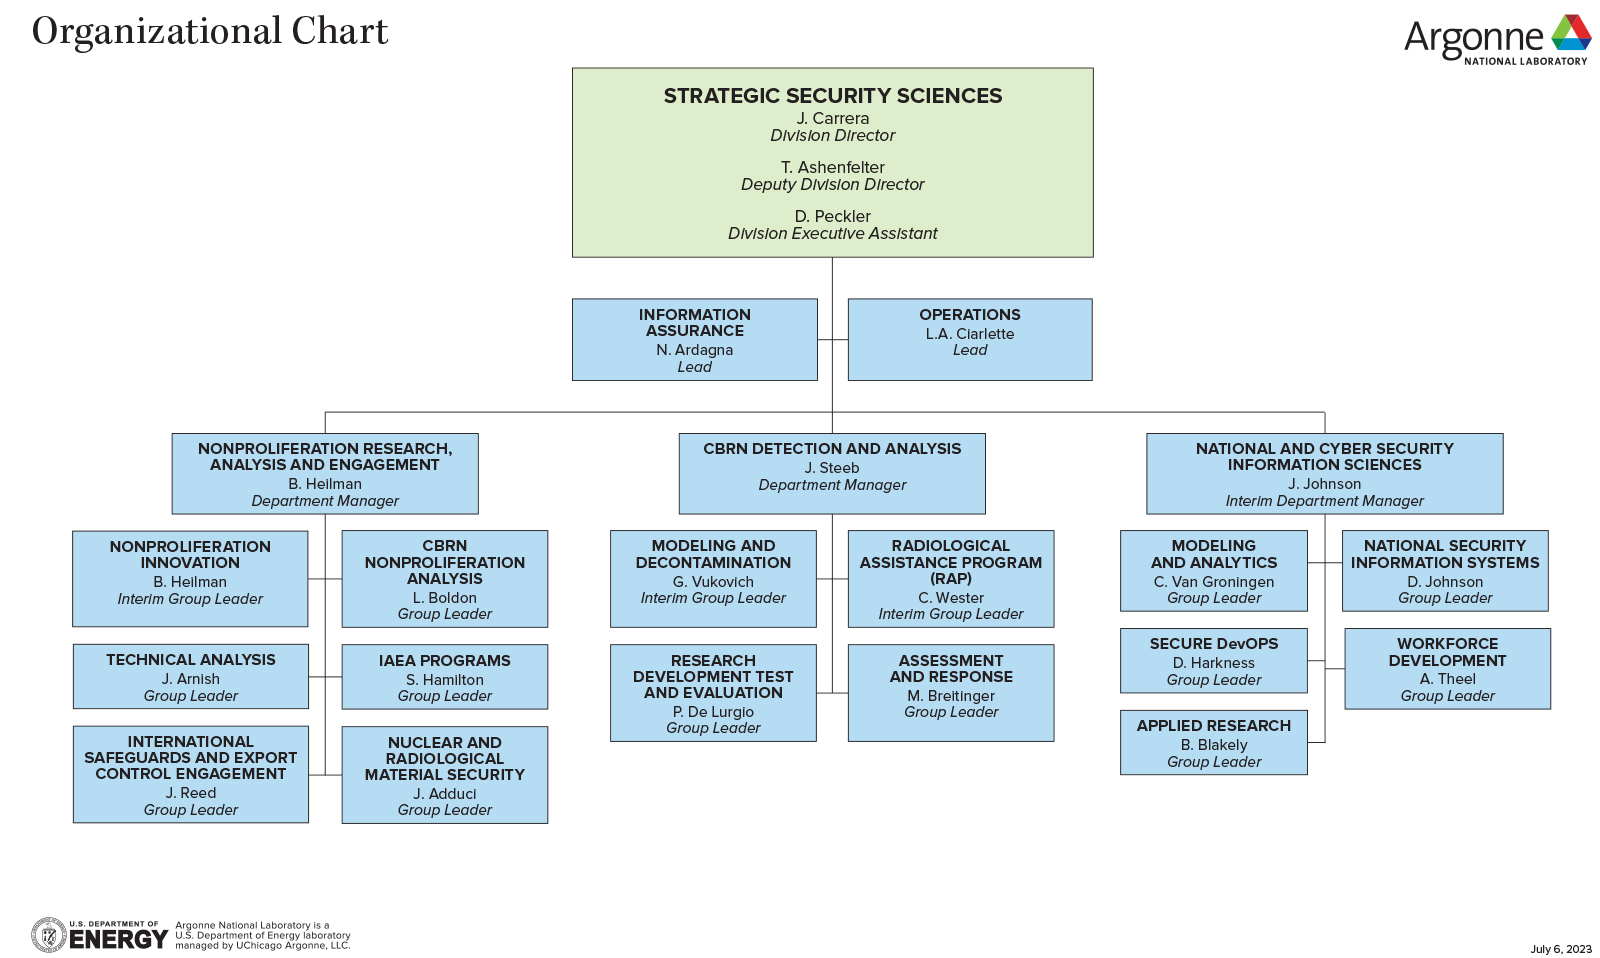 Organization chart of the Argonne Strategic Security Sciences division.